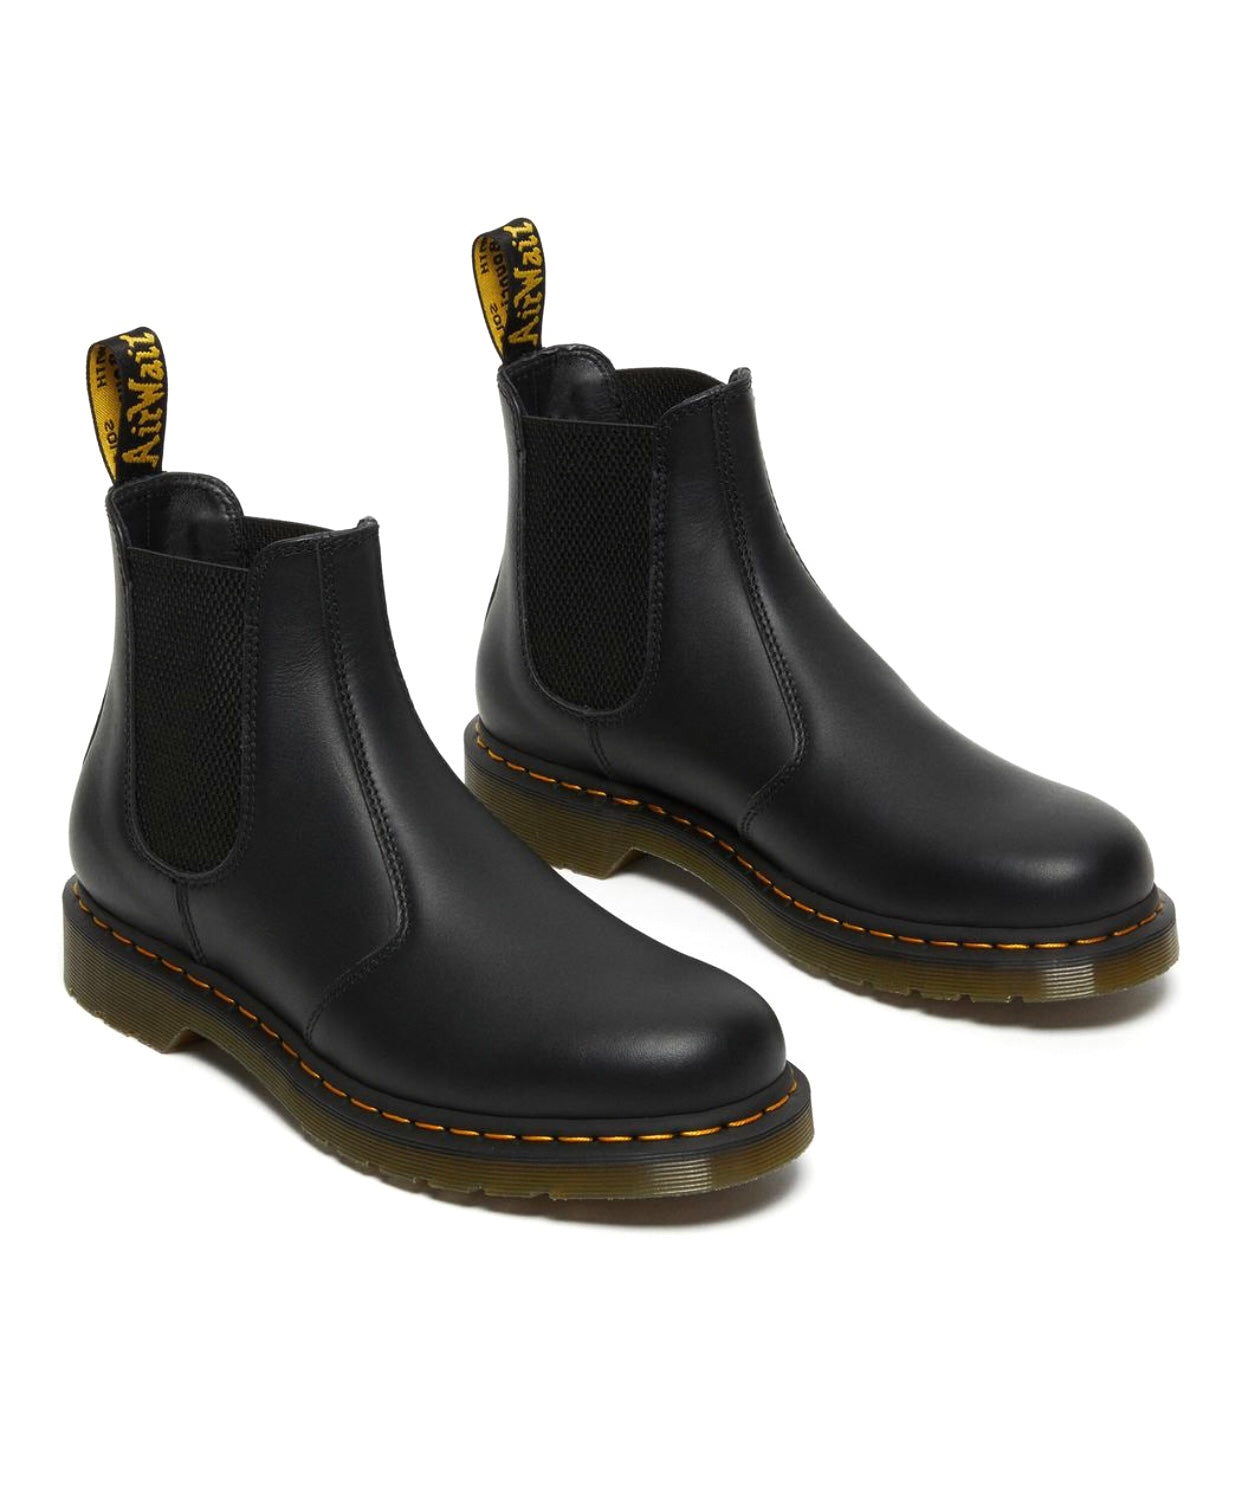 Dr. Martens 2976 Black Nappa Yellow Stitch Chelsea Elastic Sided Boot